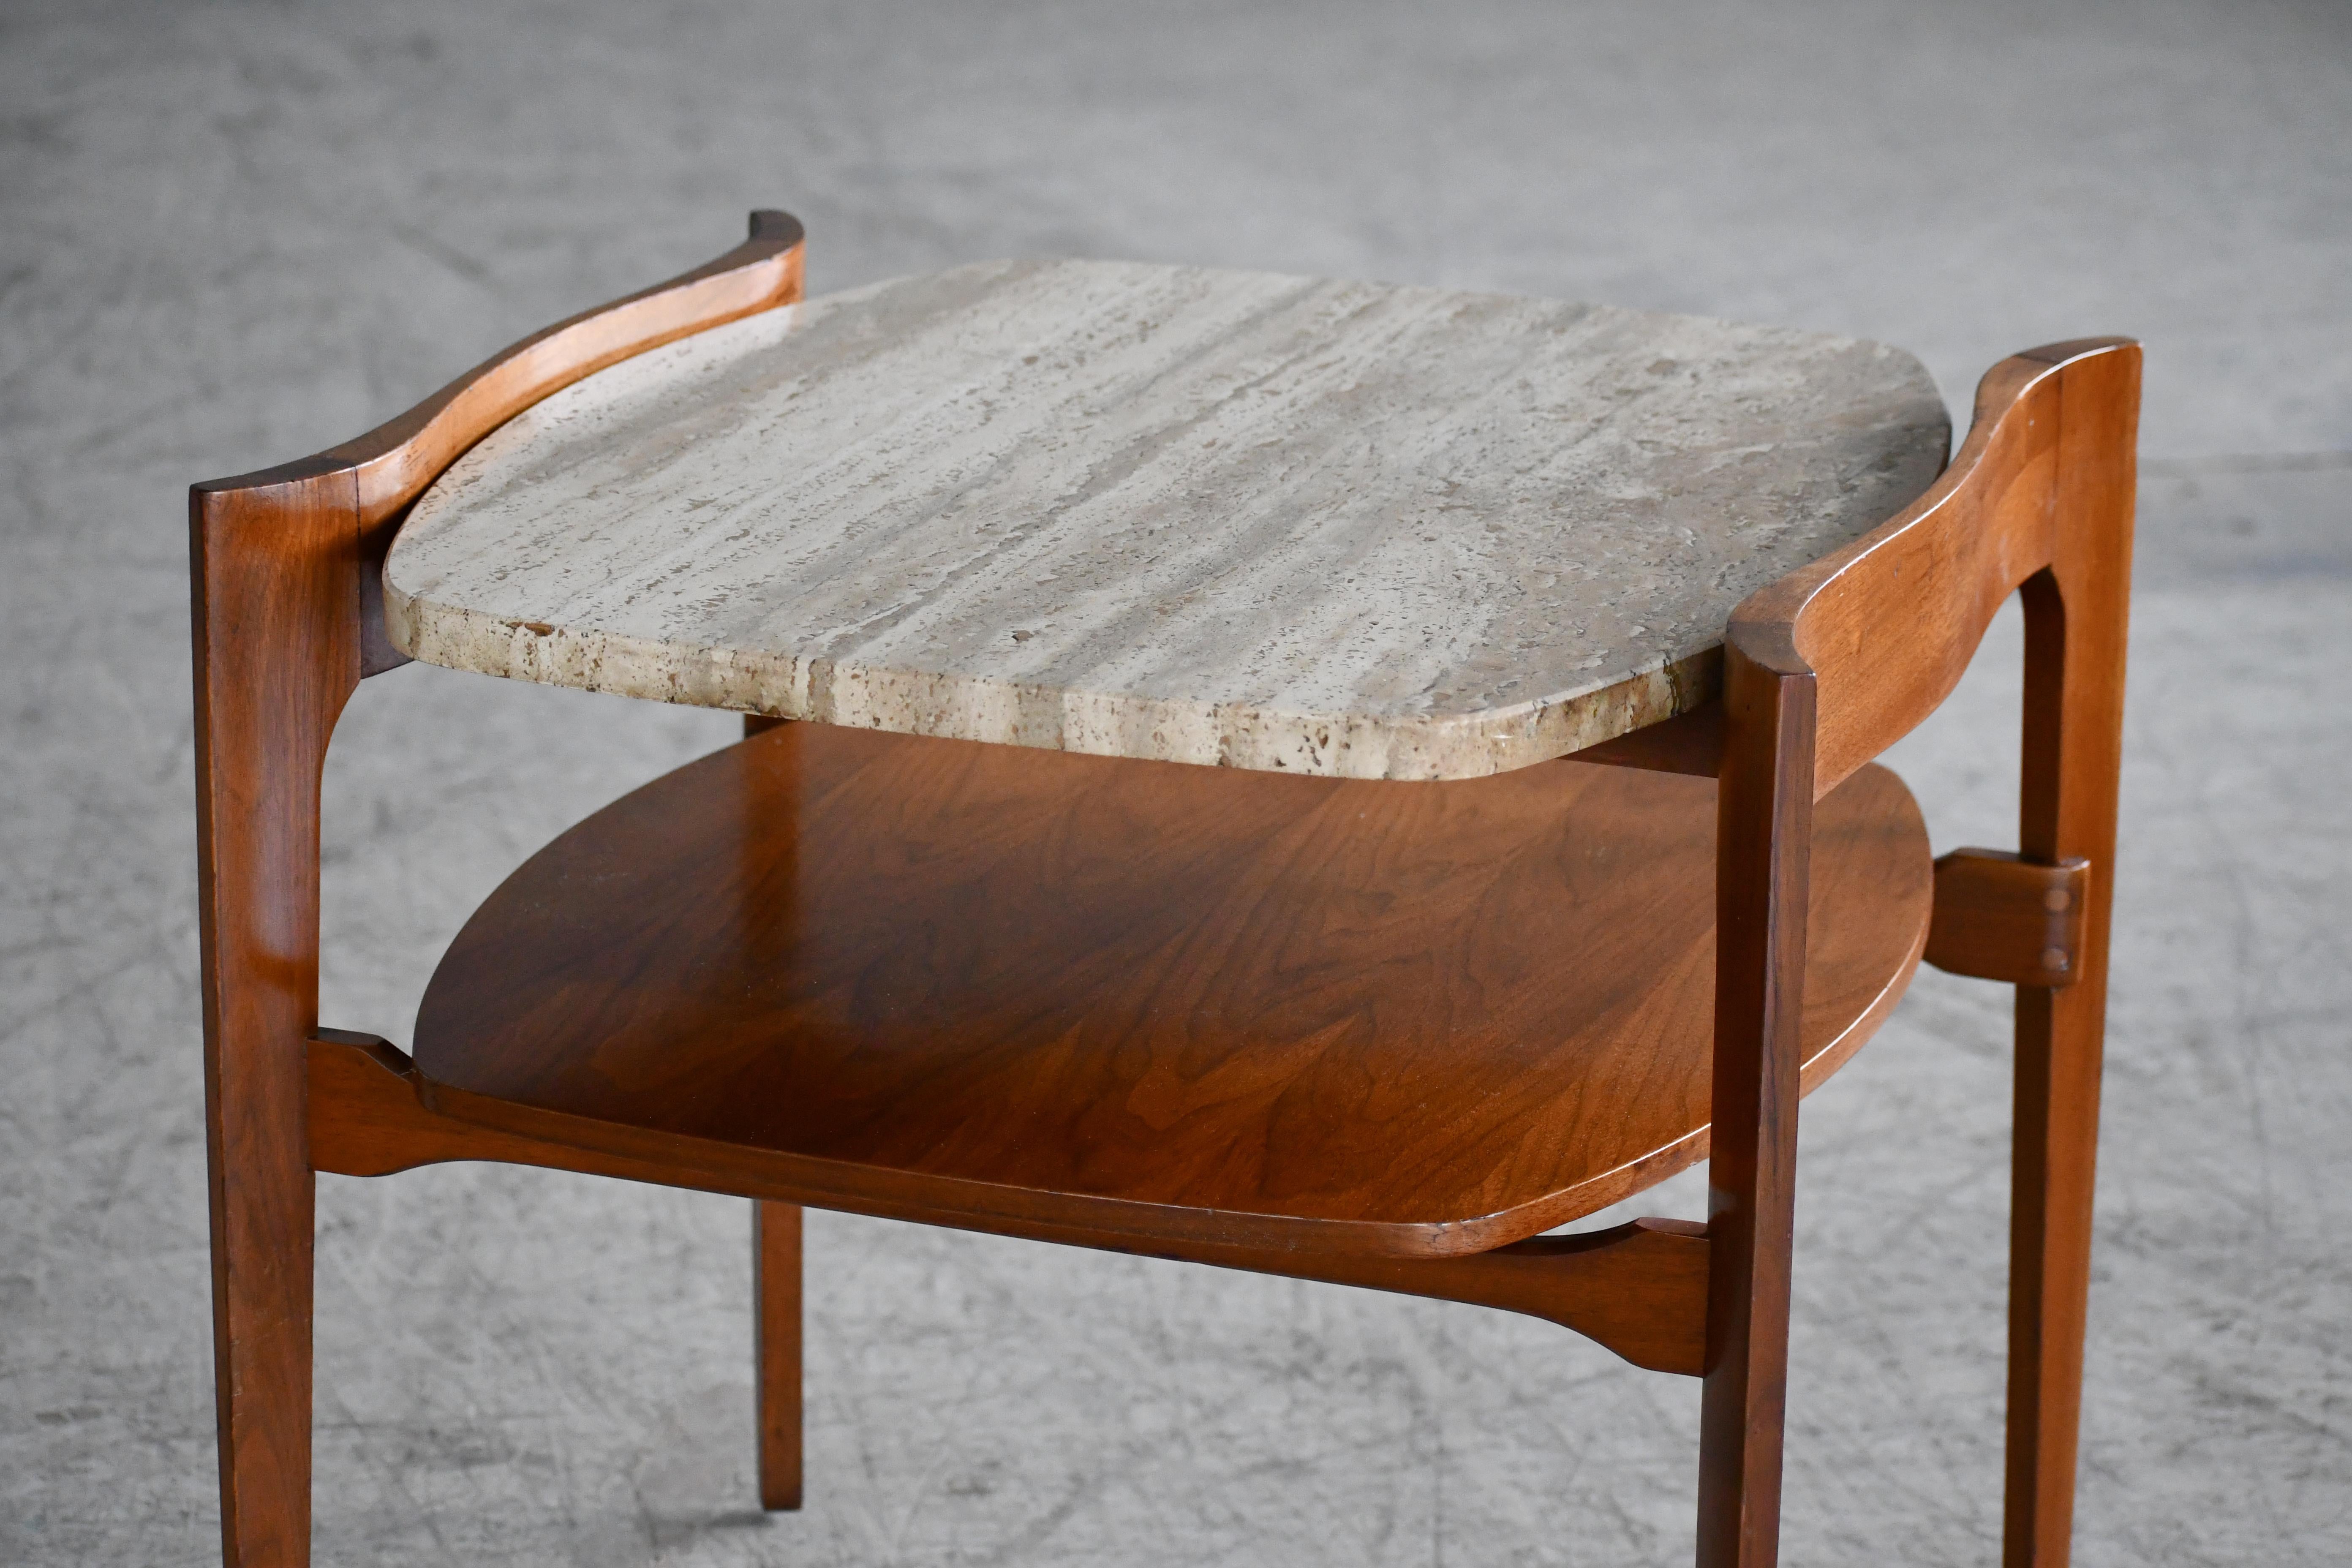 Bertha Schaefer Midcentury End or Side Table in Walnut with Travertine Top  In Good Condition For Sale In Bridgeport, CT